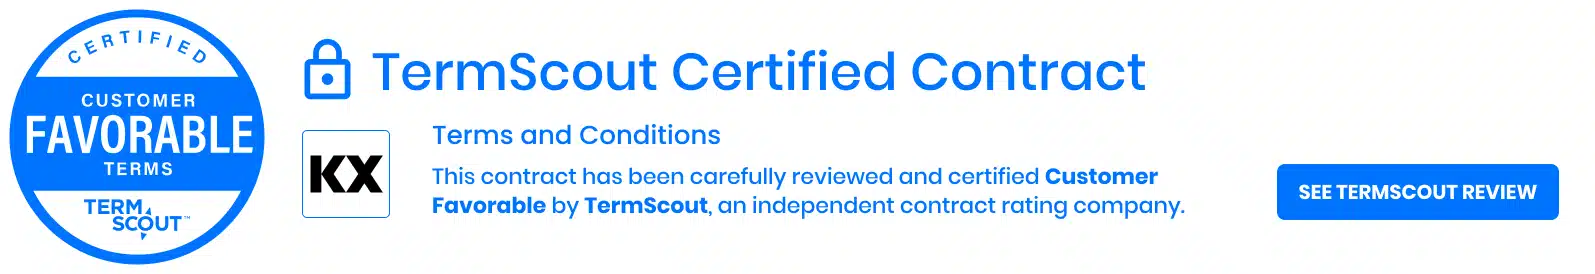 Teamscout Certified Contract